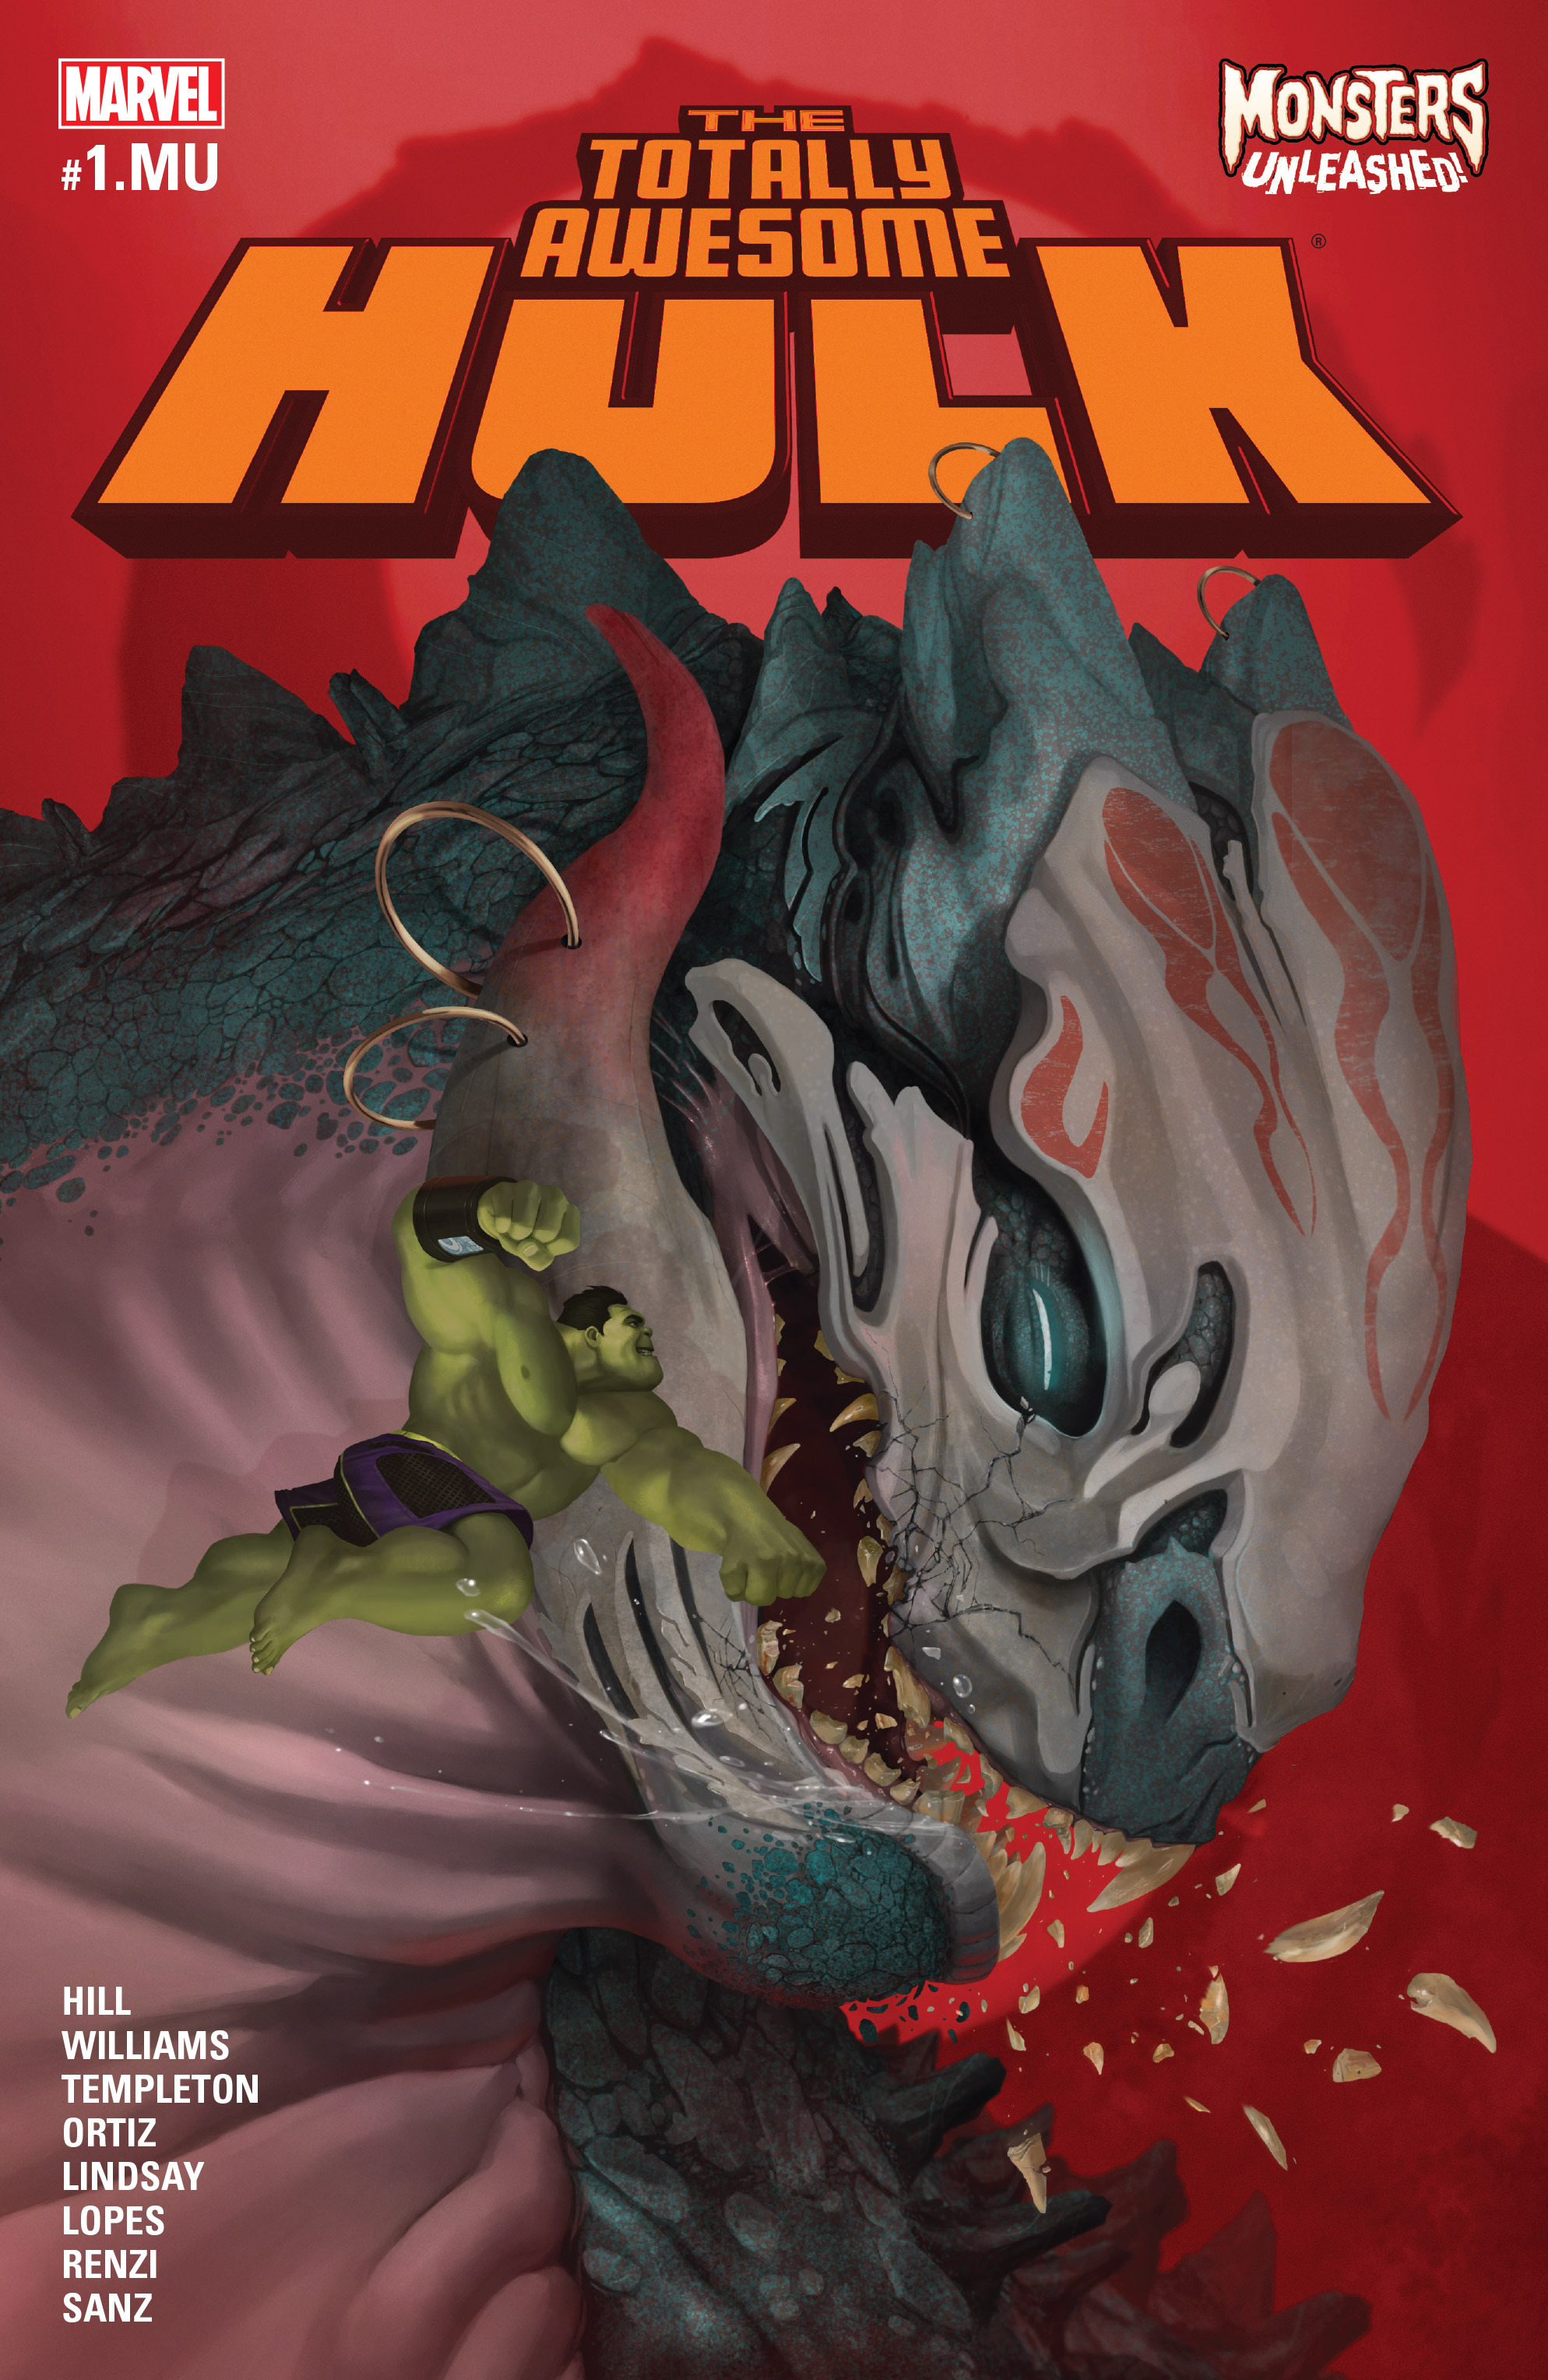 Read online Totally Awesome Hulk comic -  Issue #1.MU - 1